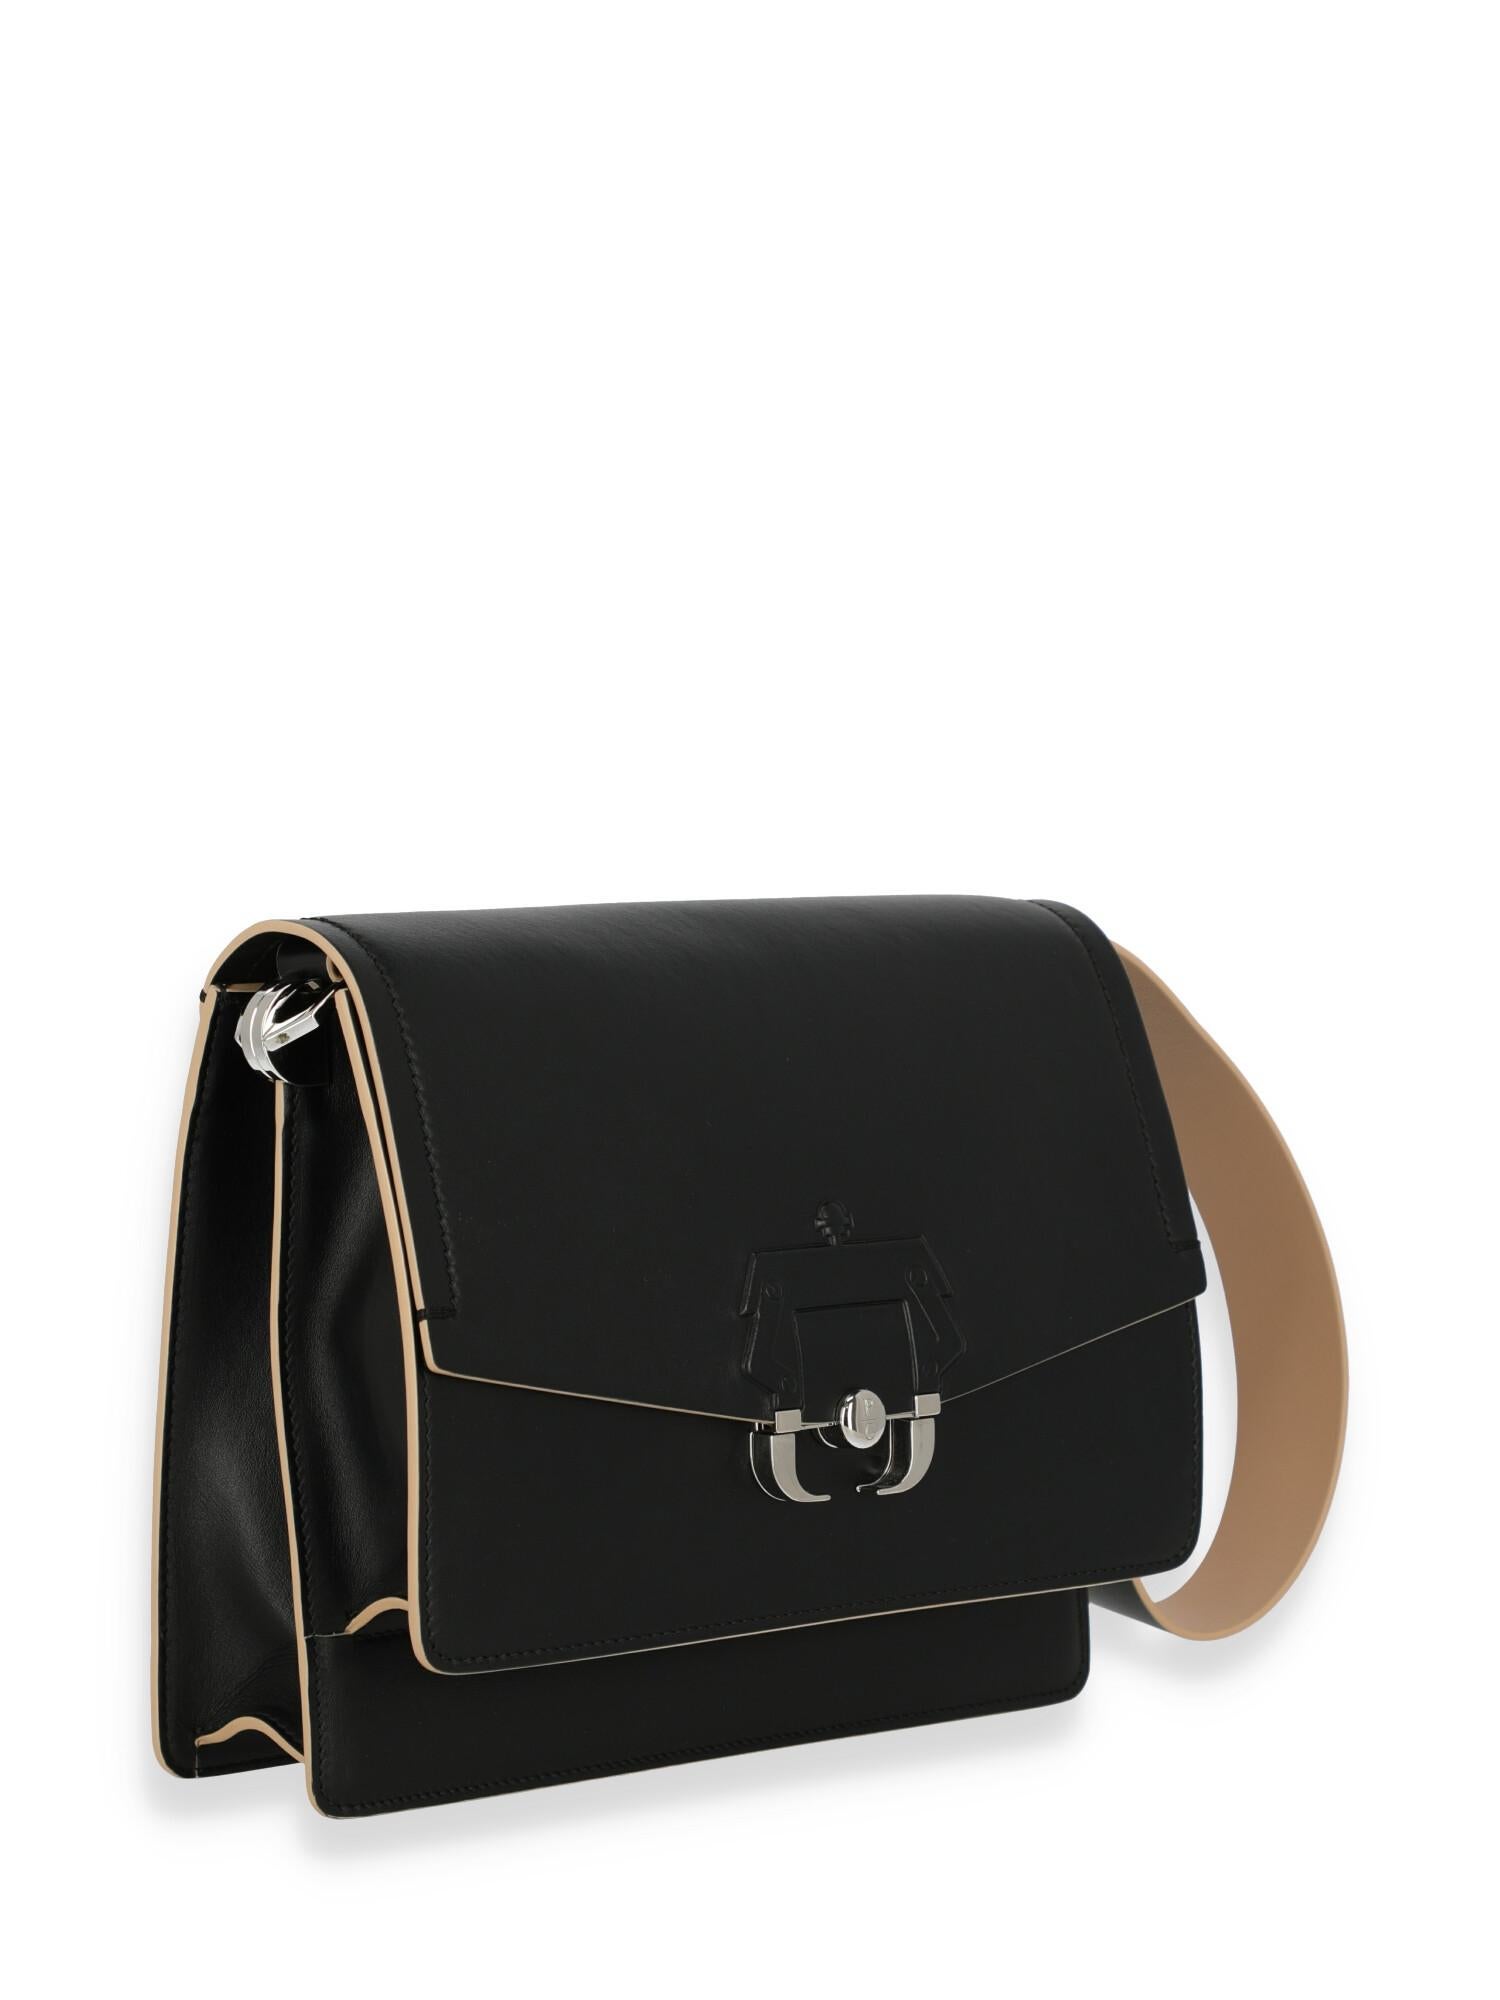 Paula Cademartori Woman Shoulder bag Black Leather In Good Condition For Sale In Milan, IT